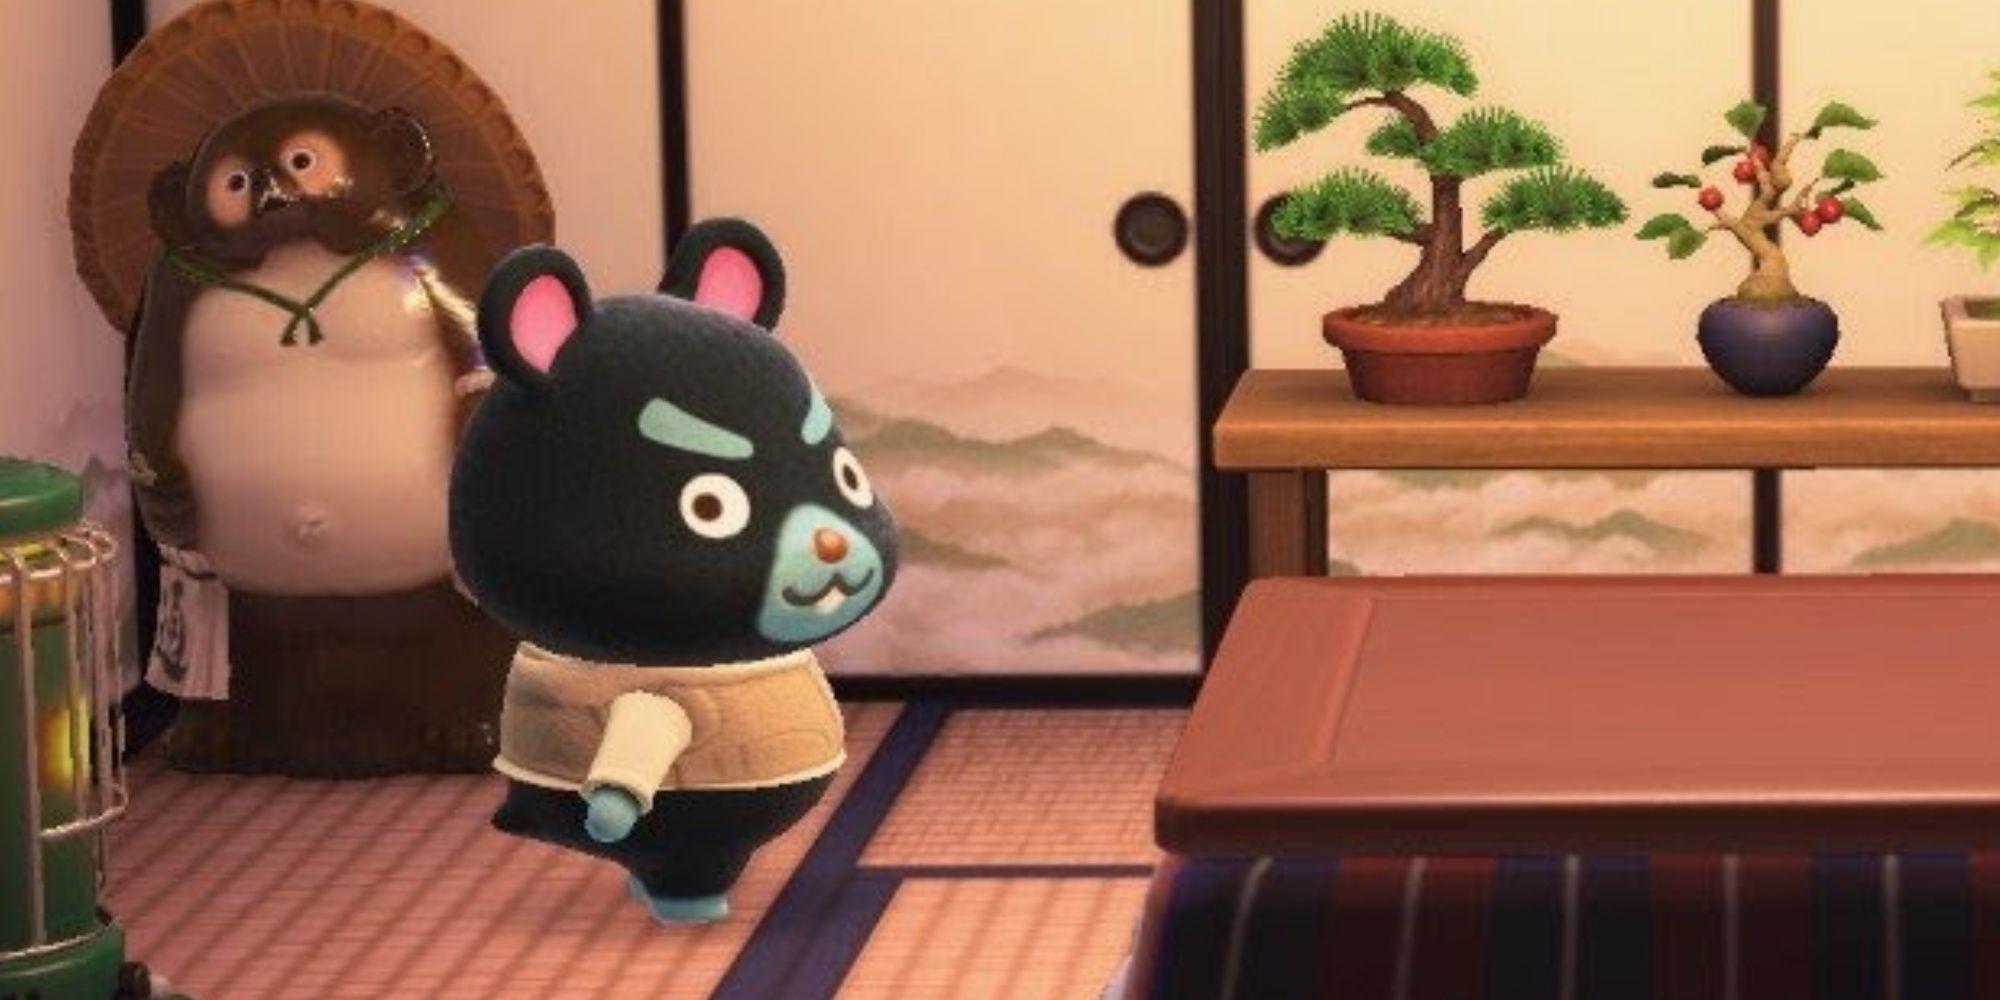 Hamphrey in his house in Animal Crossing New Horizons